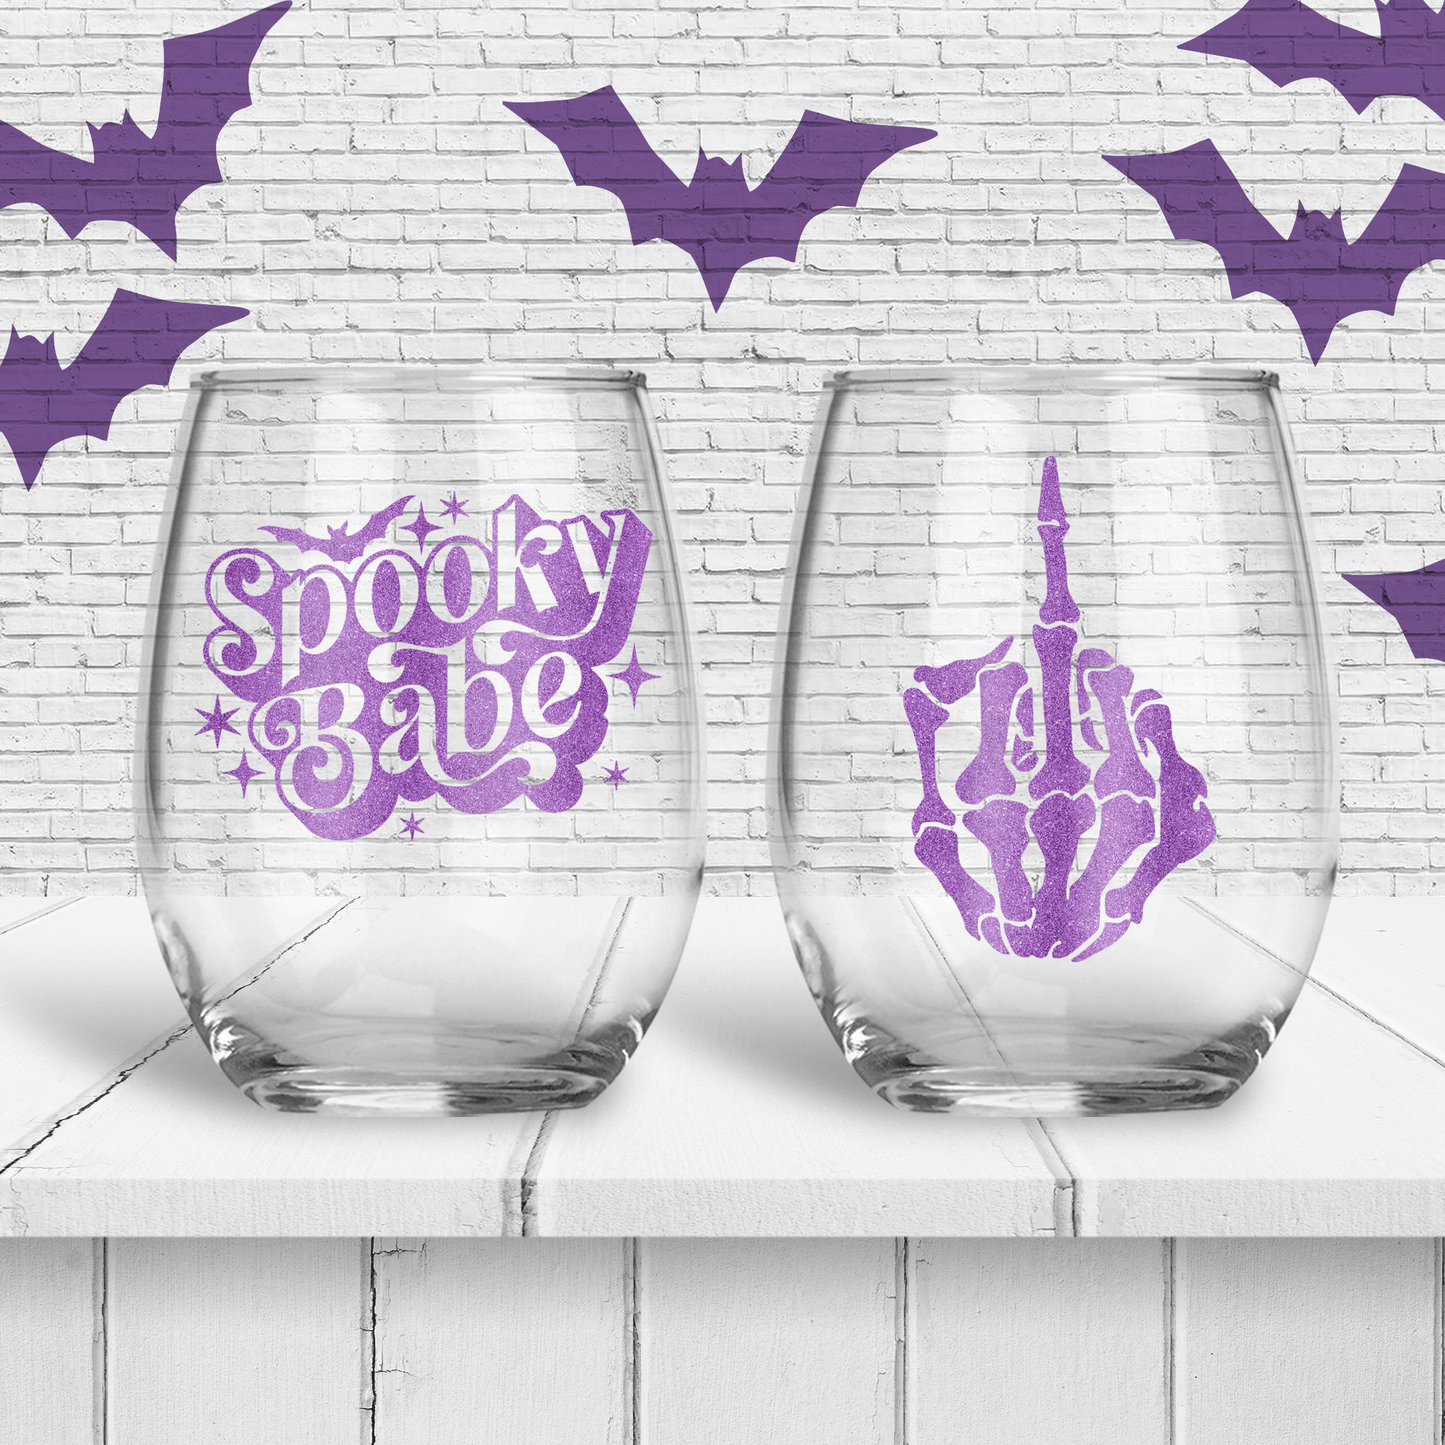 Spooky Babe Personalized Stemless Wine Glass - Two Crafty Gays